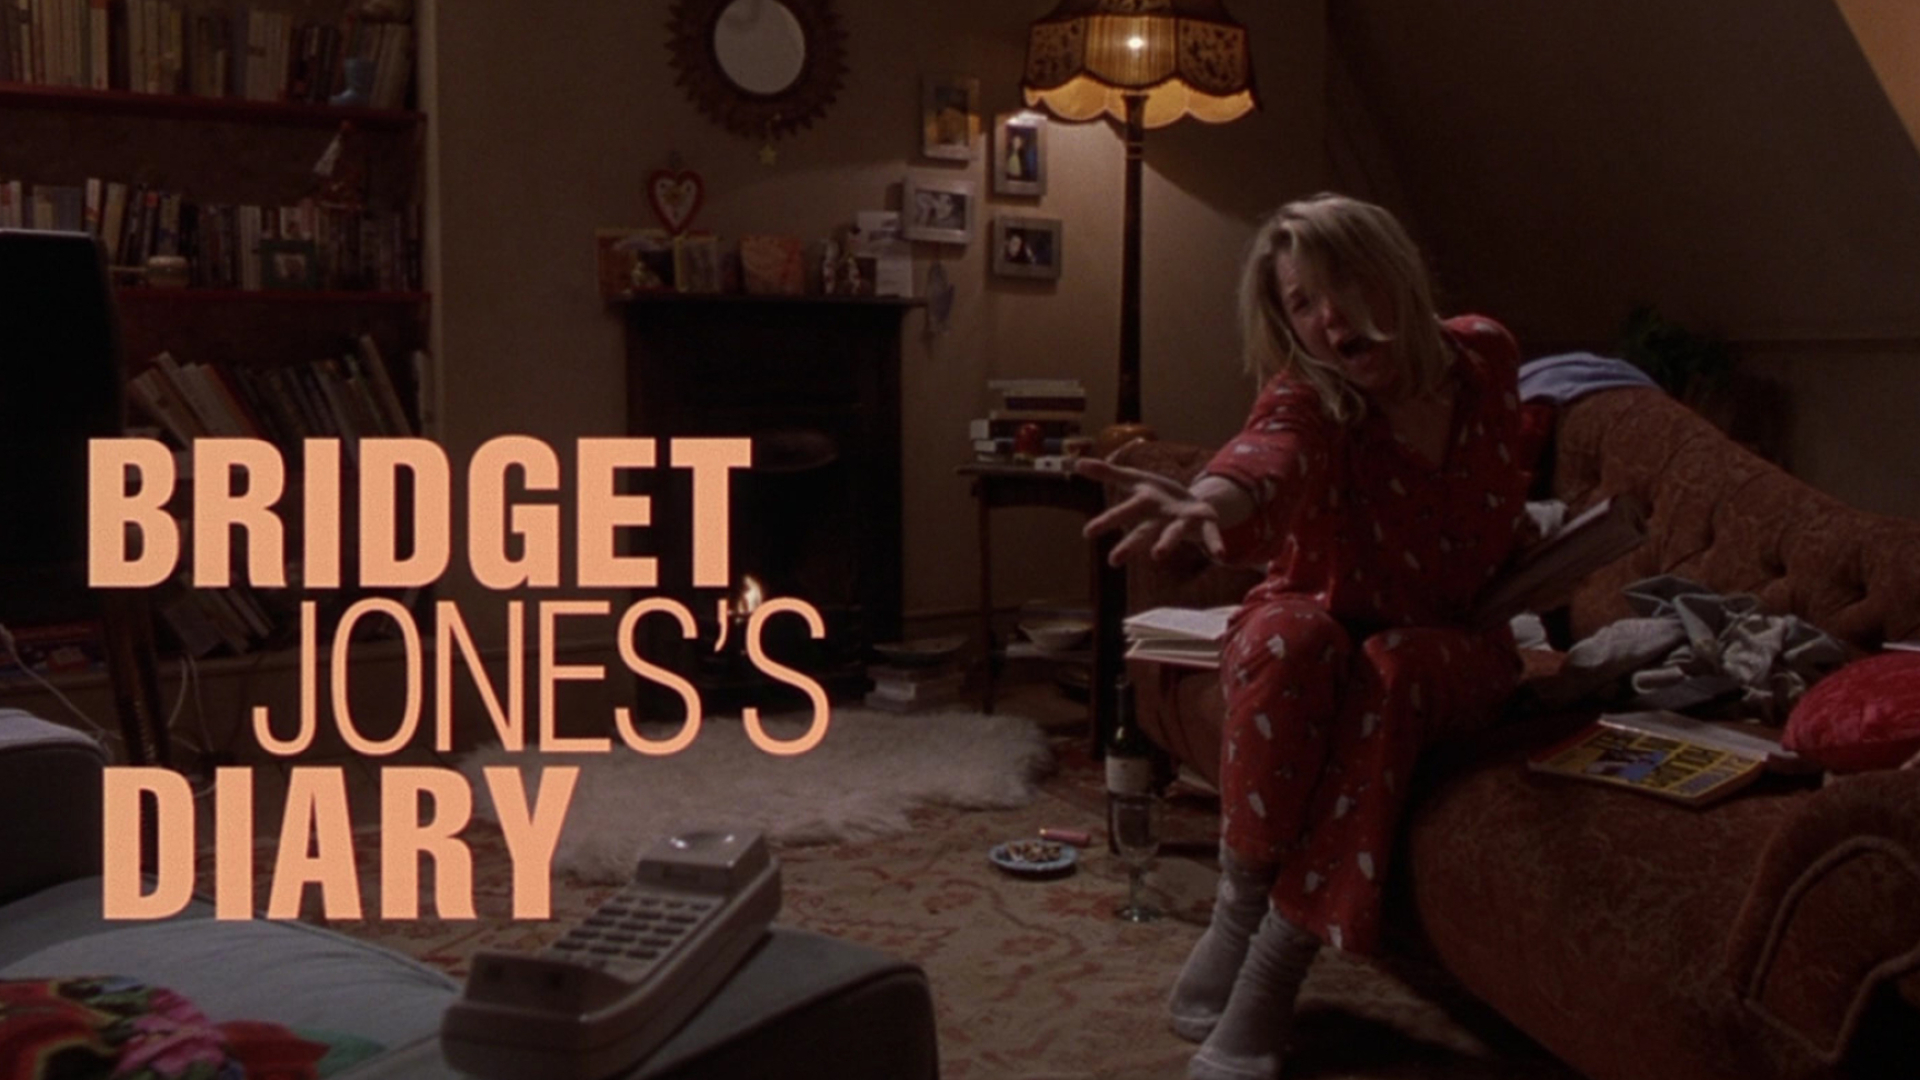 Bridget Jones's Diary, Unforgettable moments, Quirky and relatable, Must-see film, 1920x1080 Full HD Desktop